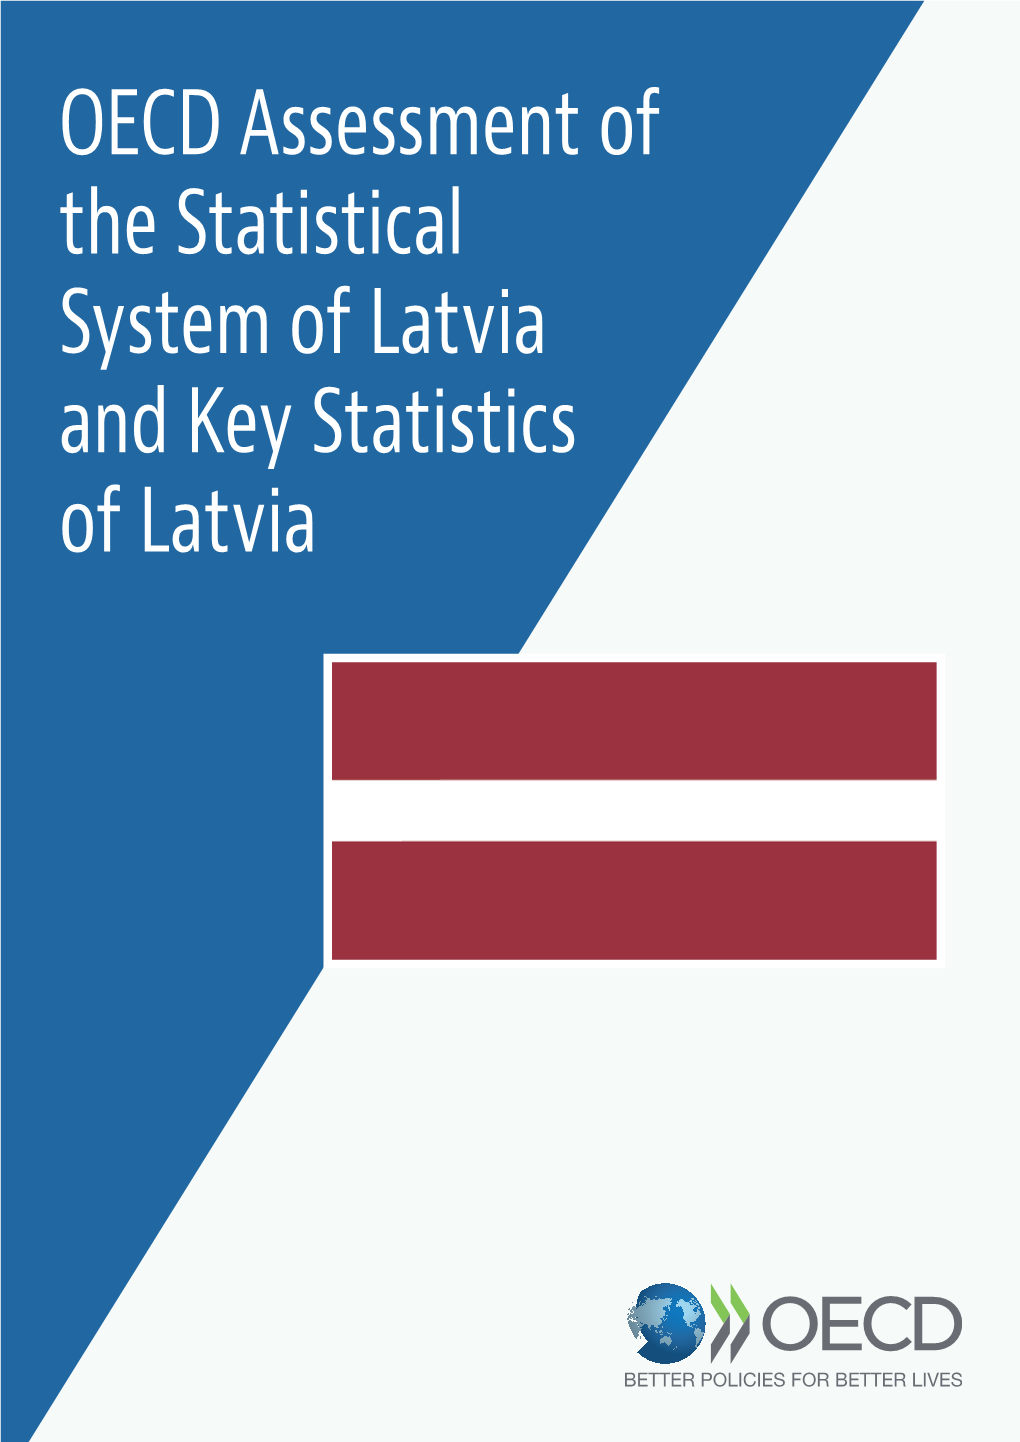 OECD Assessment of the Statistical System of Latvia and Key Statistics of Latvia